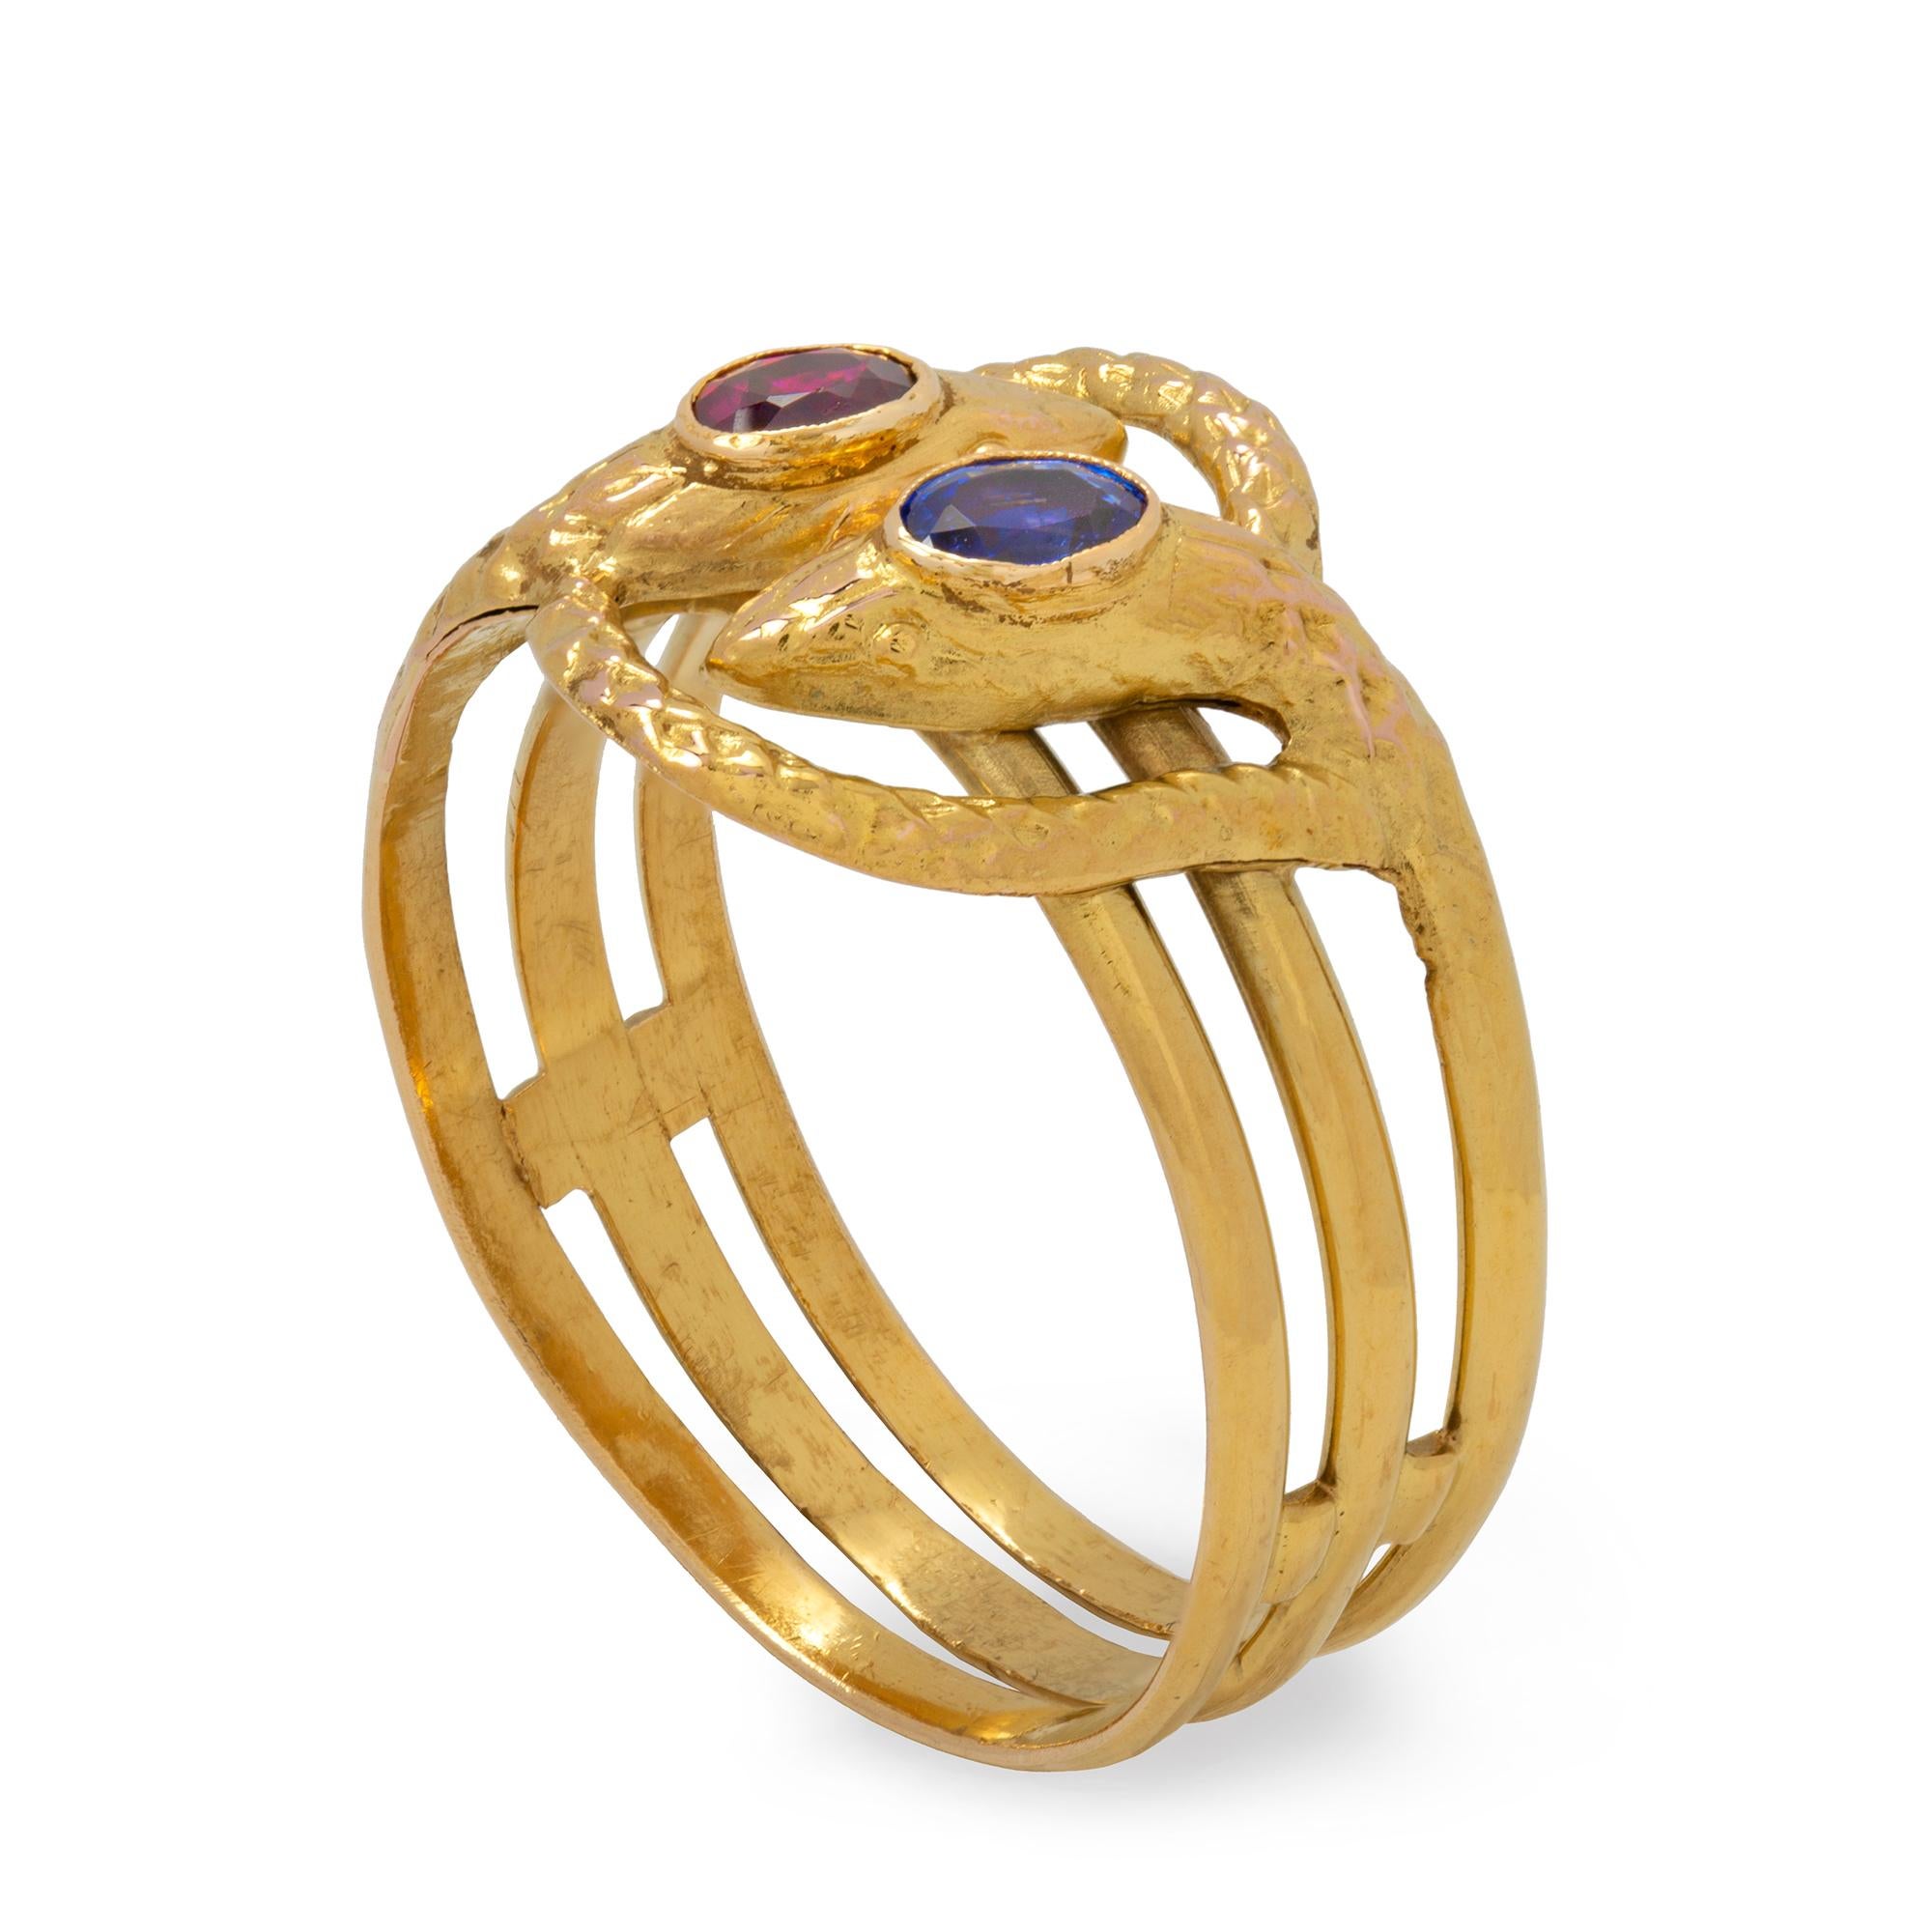 A Russian gold and gemset twin serpent ring, the two serpents entwined the head of one set with an oval-shaped sapphire, the other with an oval-shaped ruby, all set in gold, marked 56 zolotnik,  circa 1910, measuring approximately 0.7 to 1.5cm in